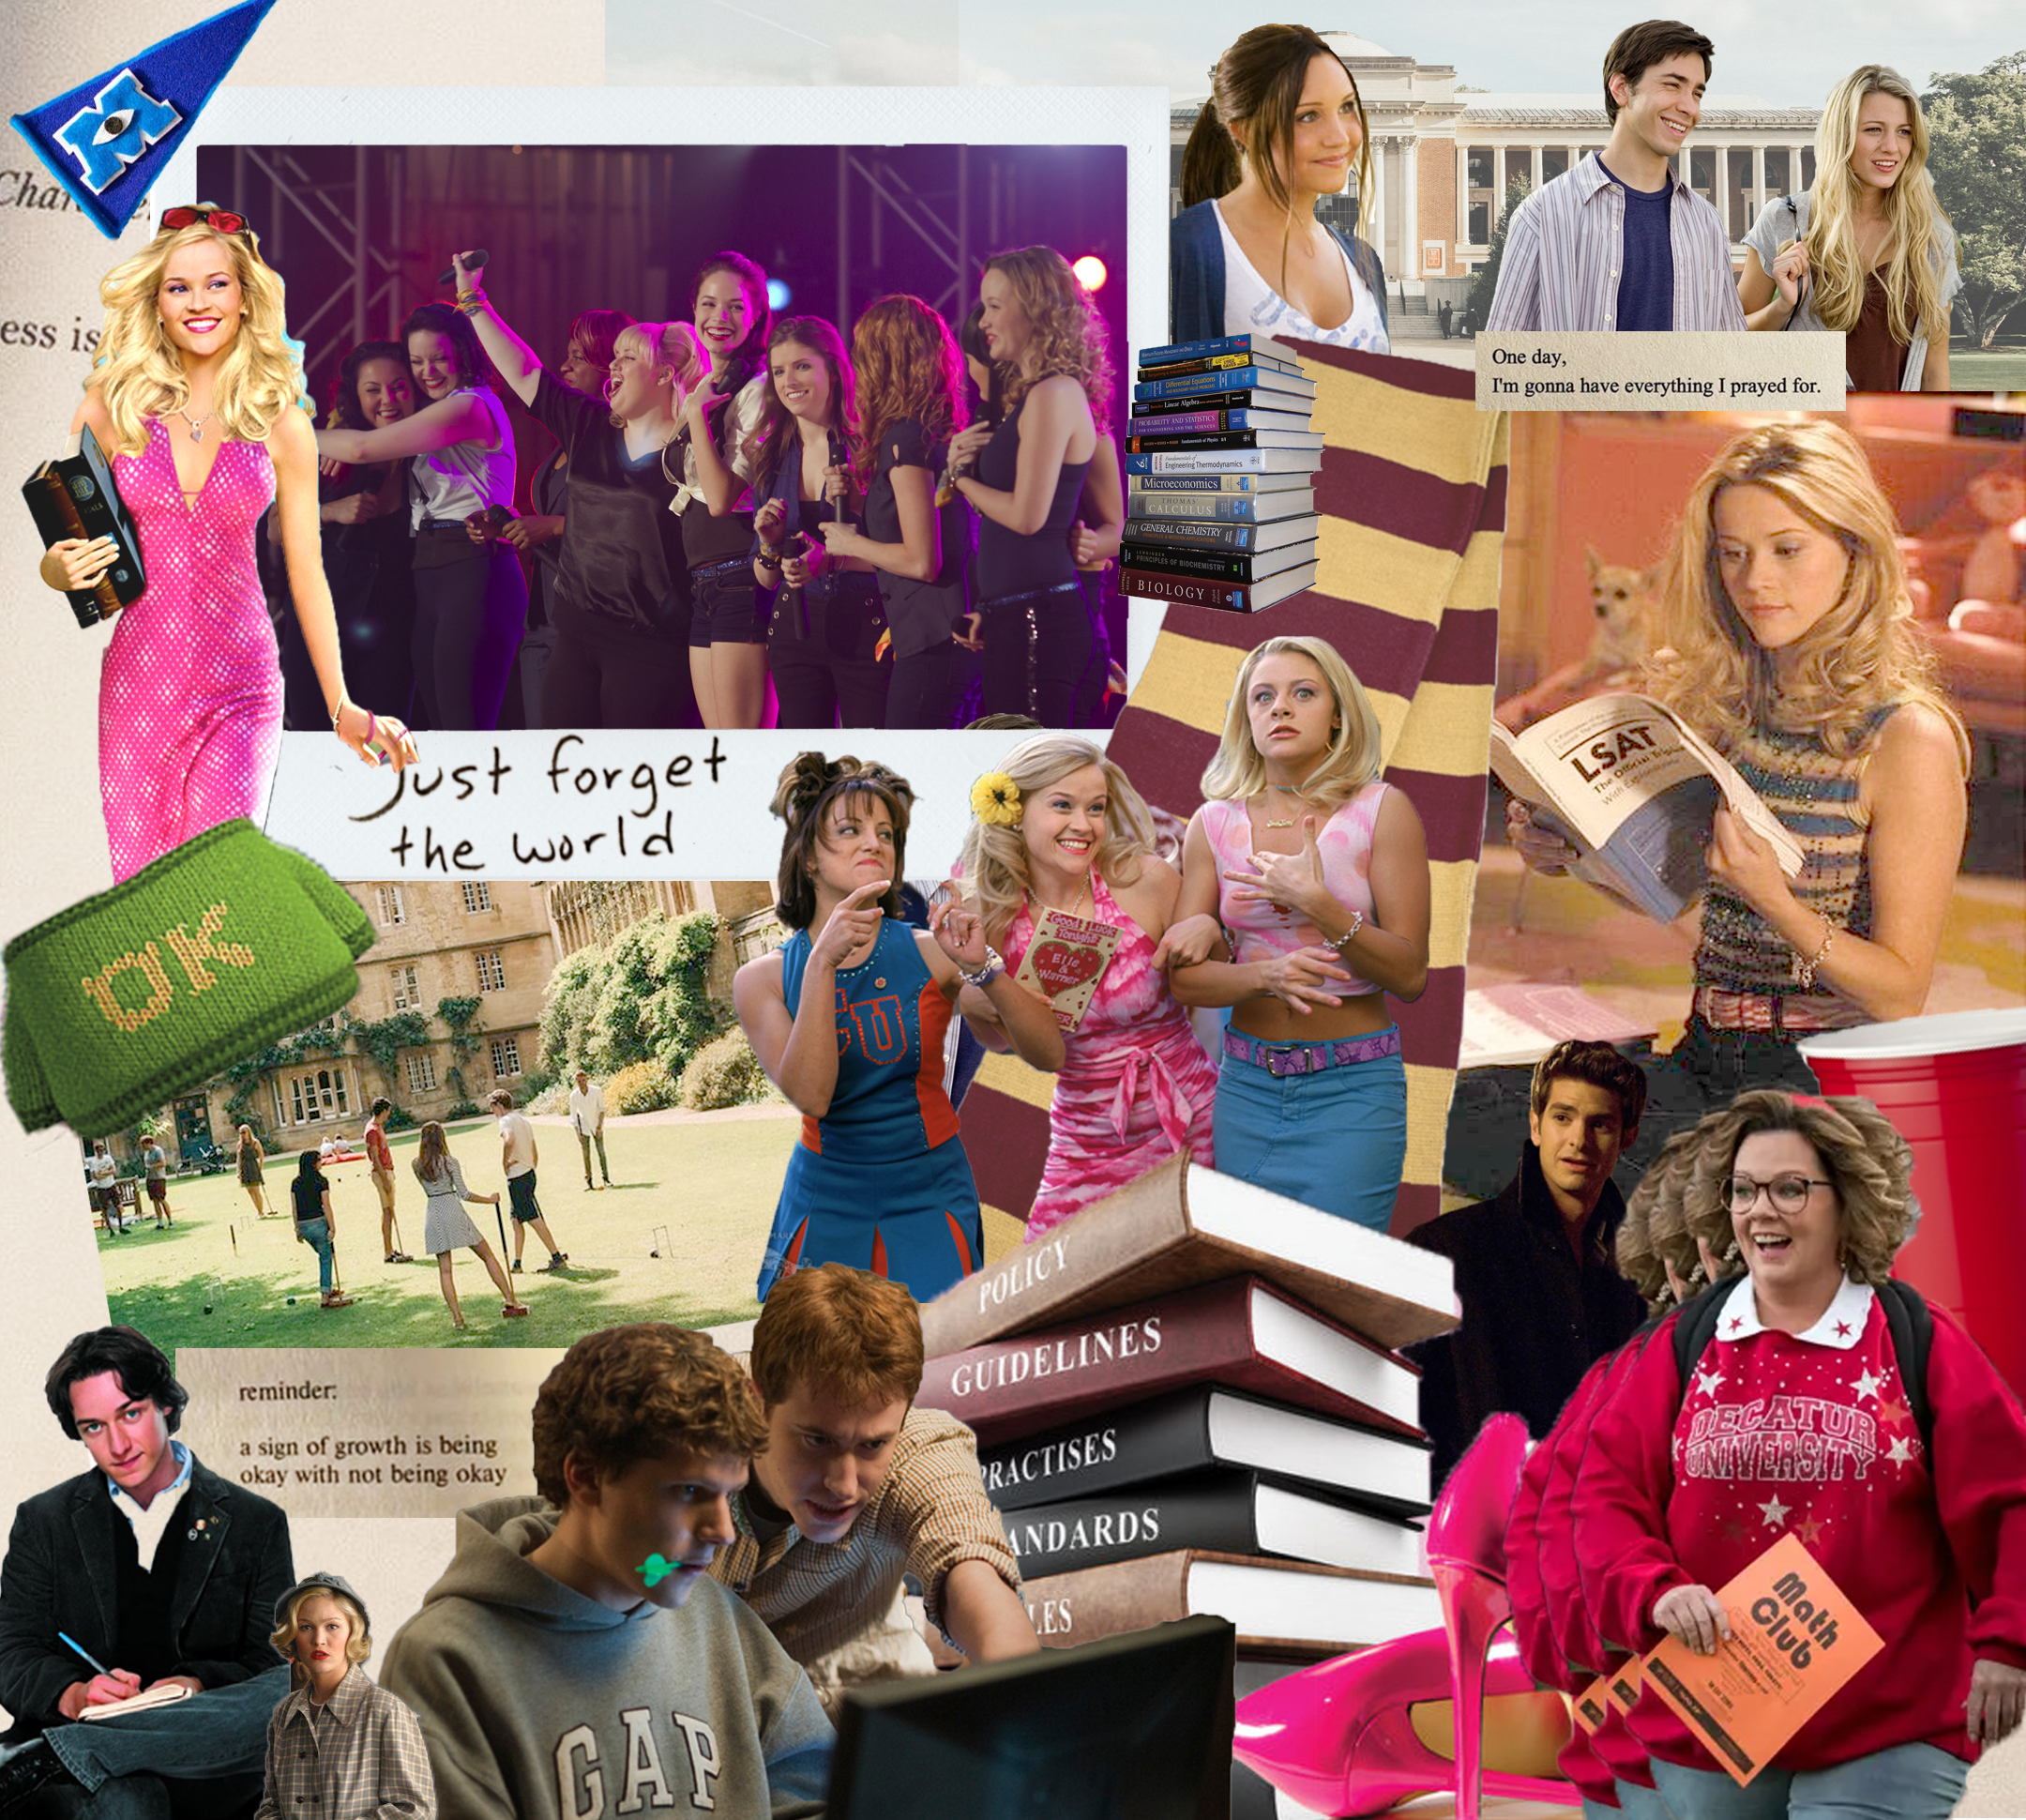 10 College life movies to watch while you are procrastinating with your roommate